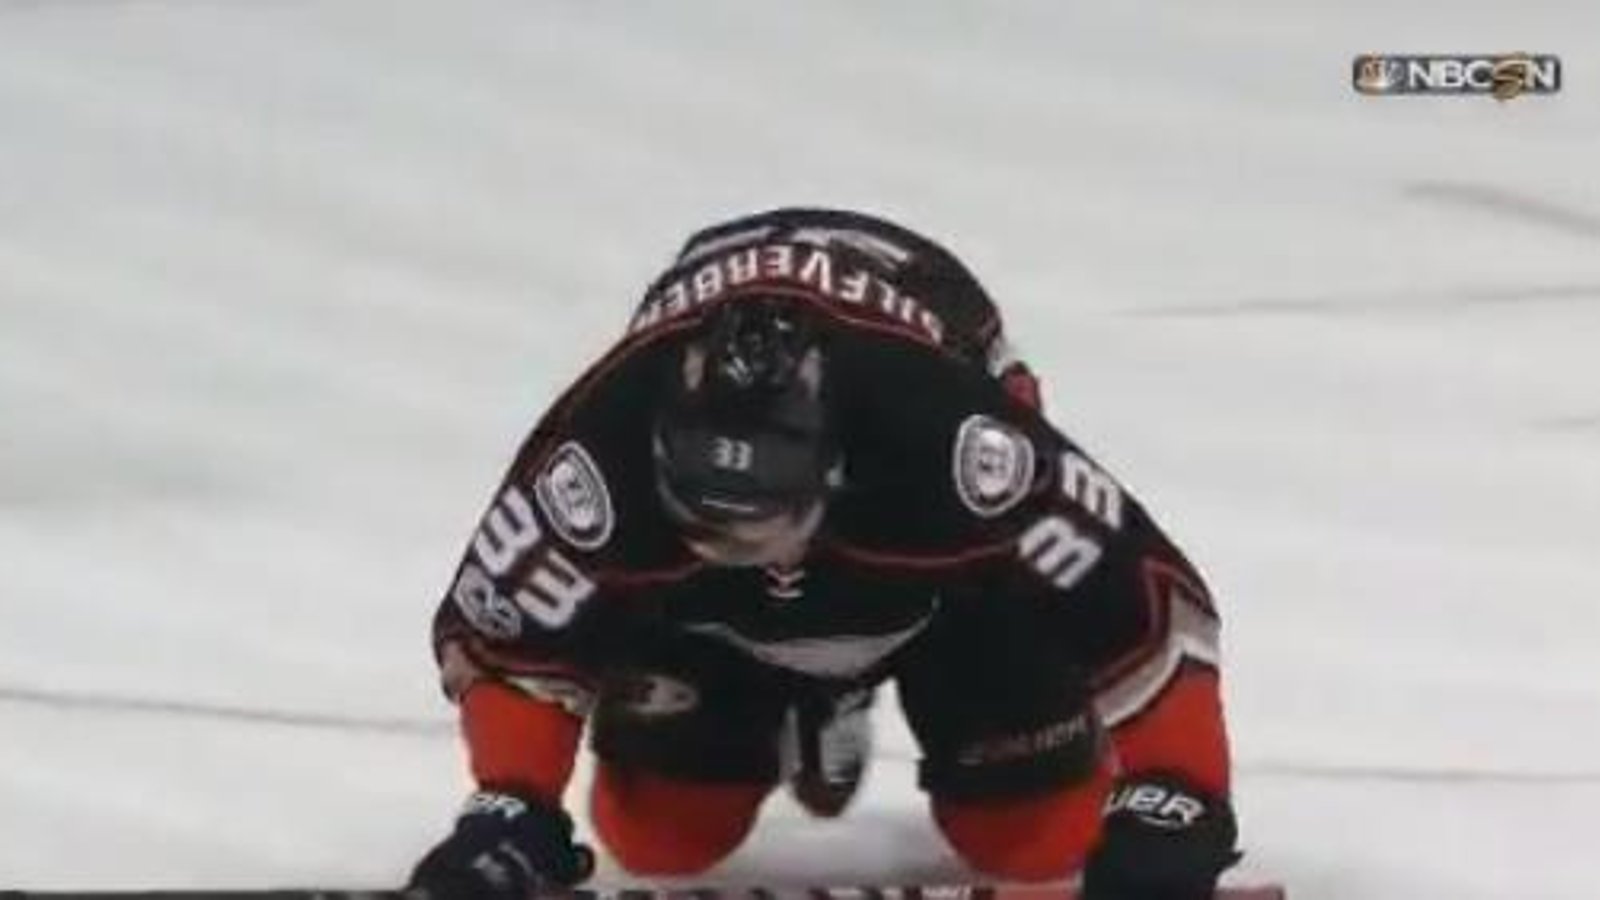 Silfverberg received a disgusting cheap shot that went unnoticed.